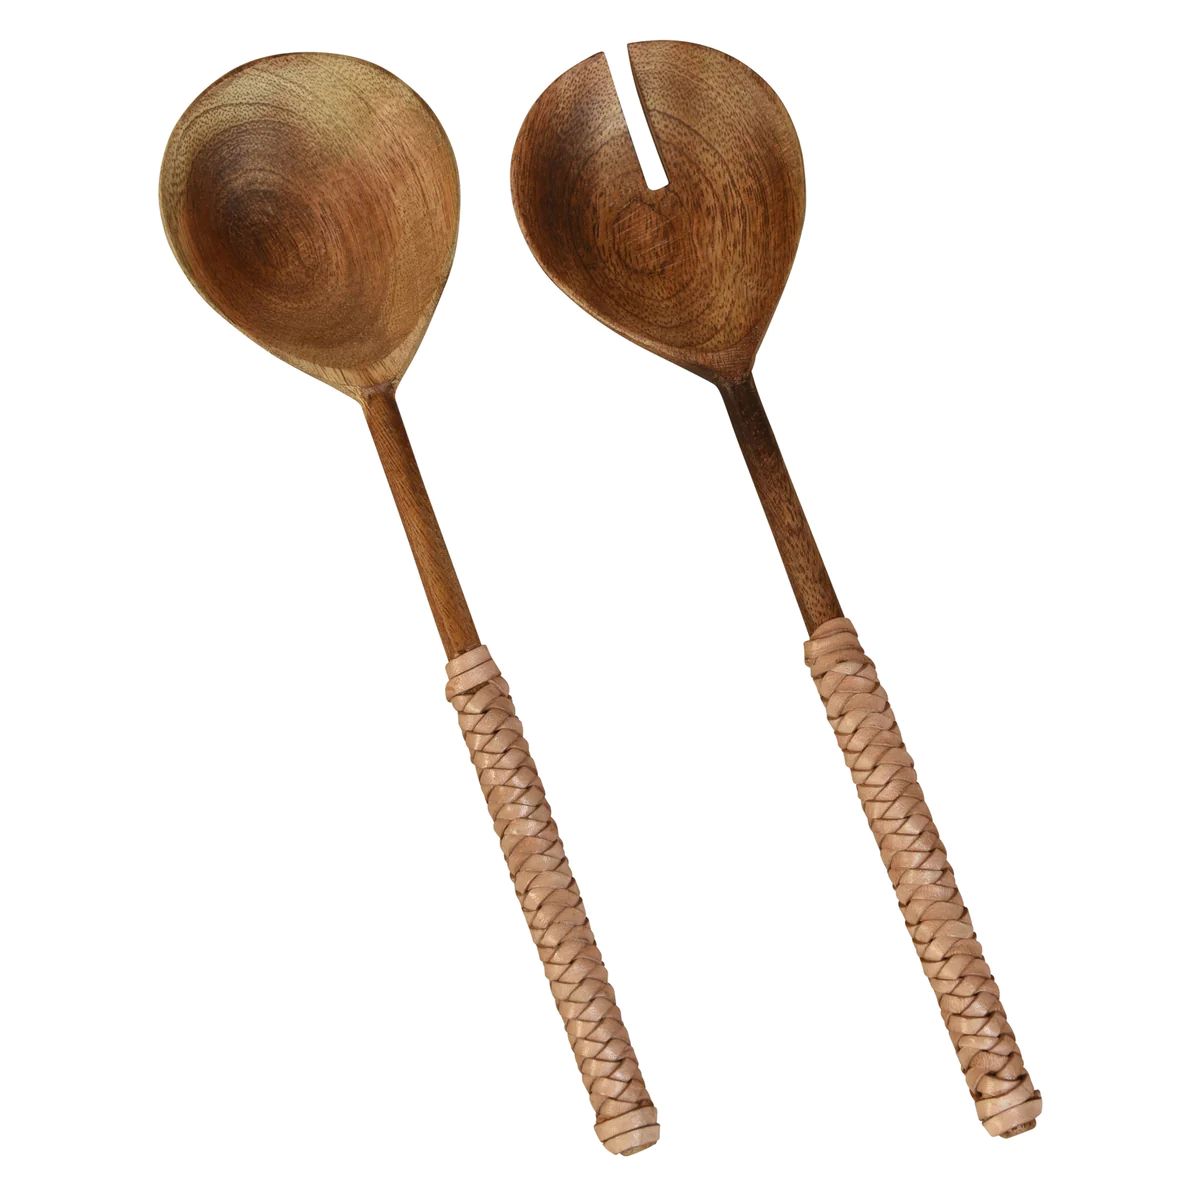 Hand-Carved Woven Leather Handle Salad Servers | APIARY by The Busy Bee